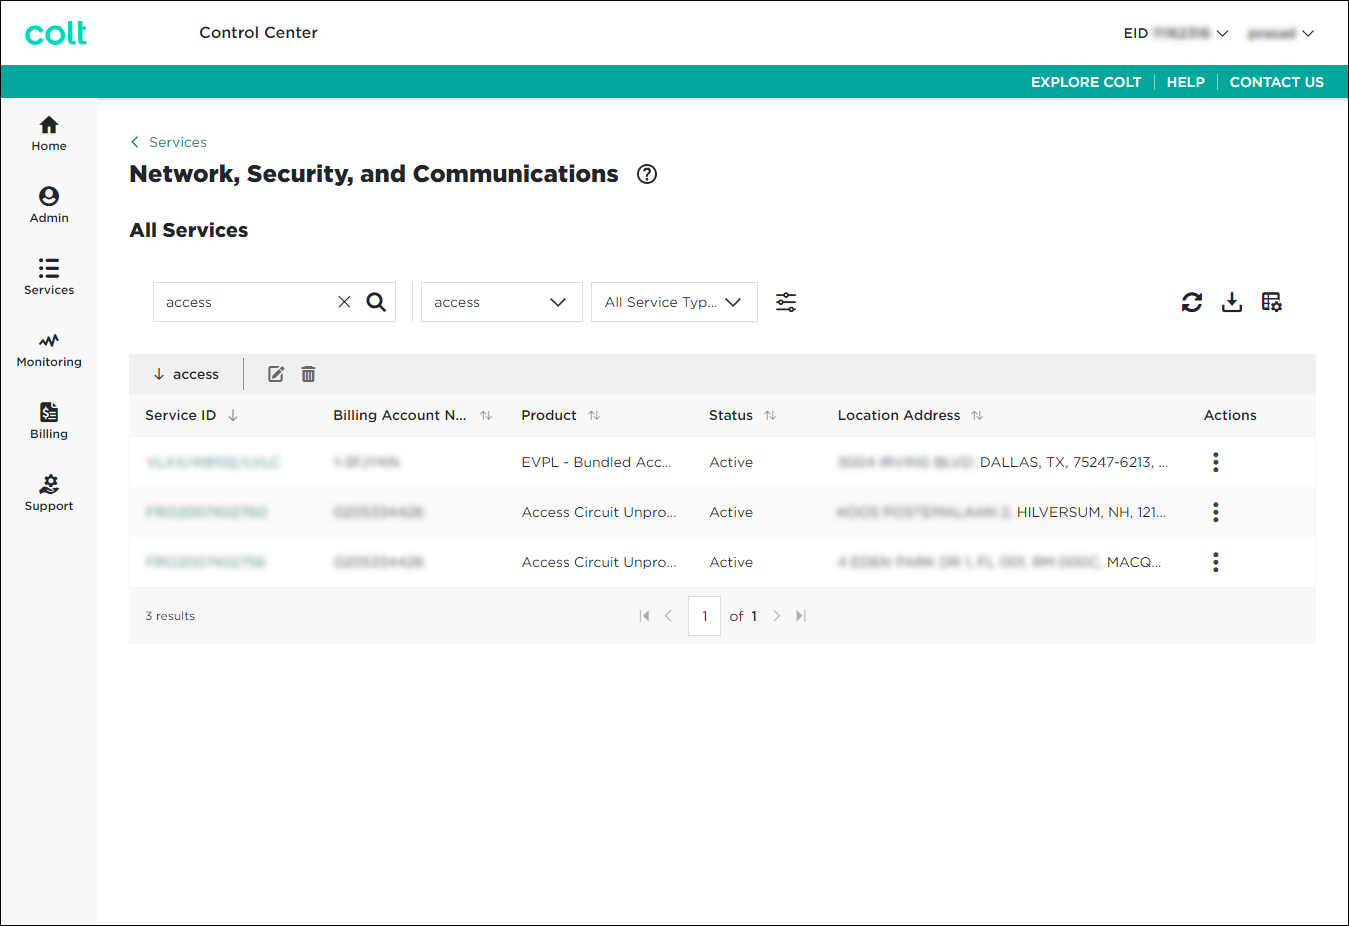 Network, Security, and Communications (showing saved view)